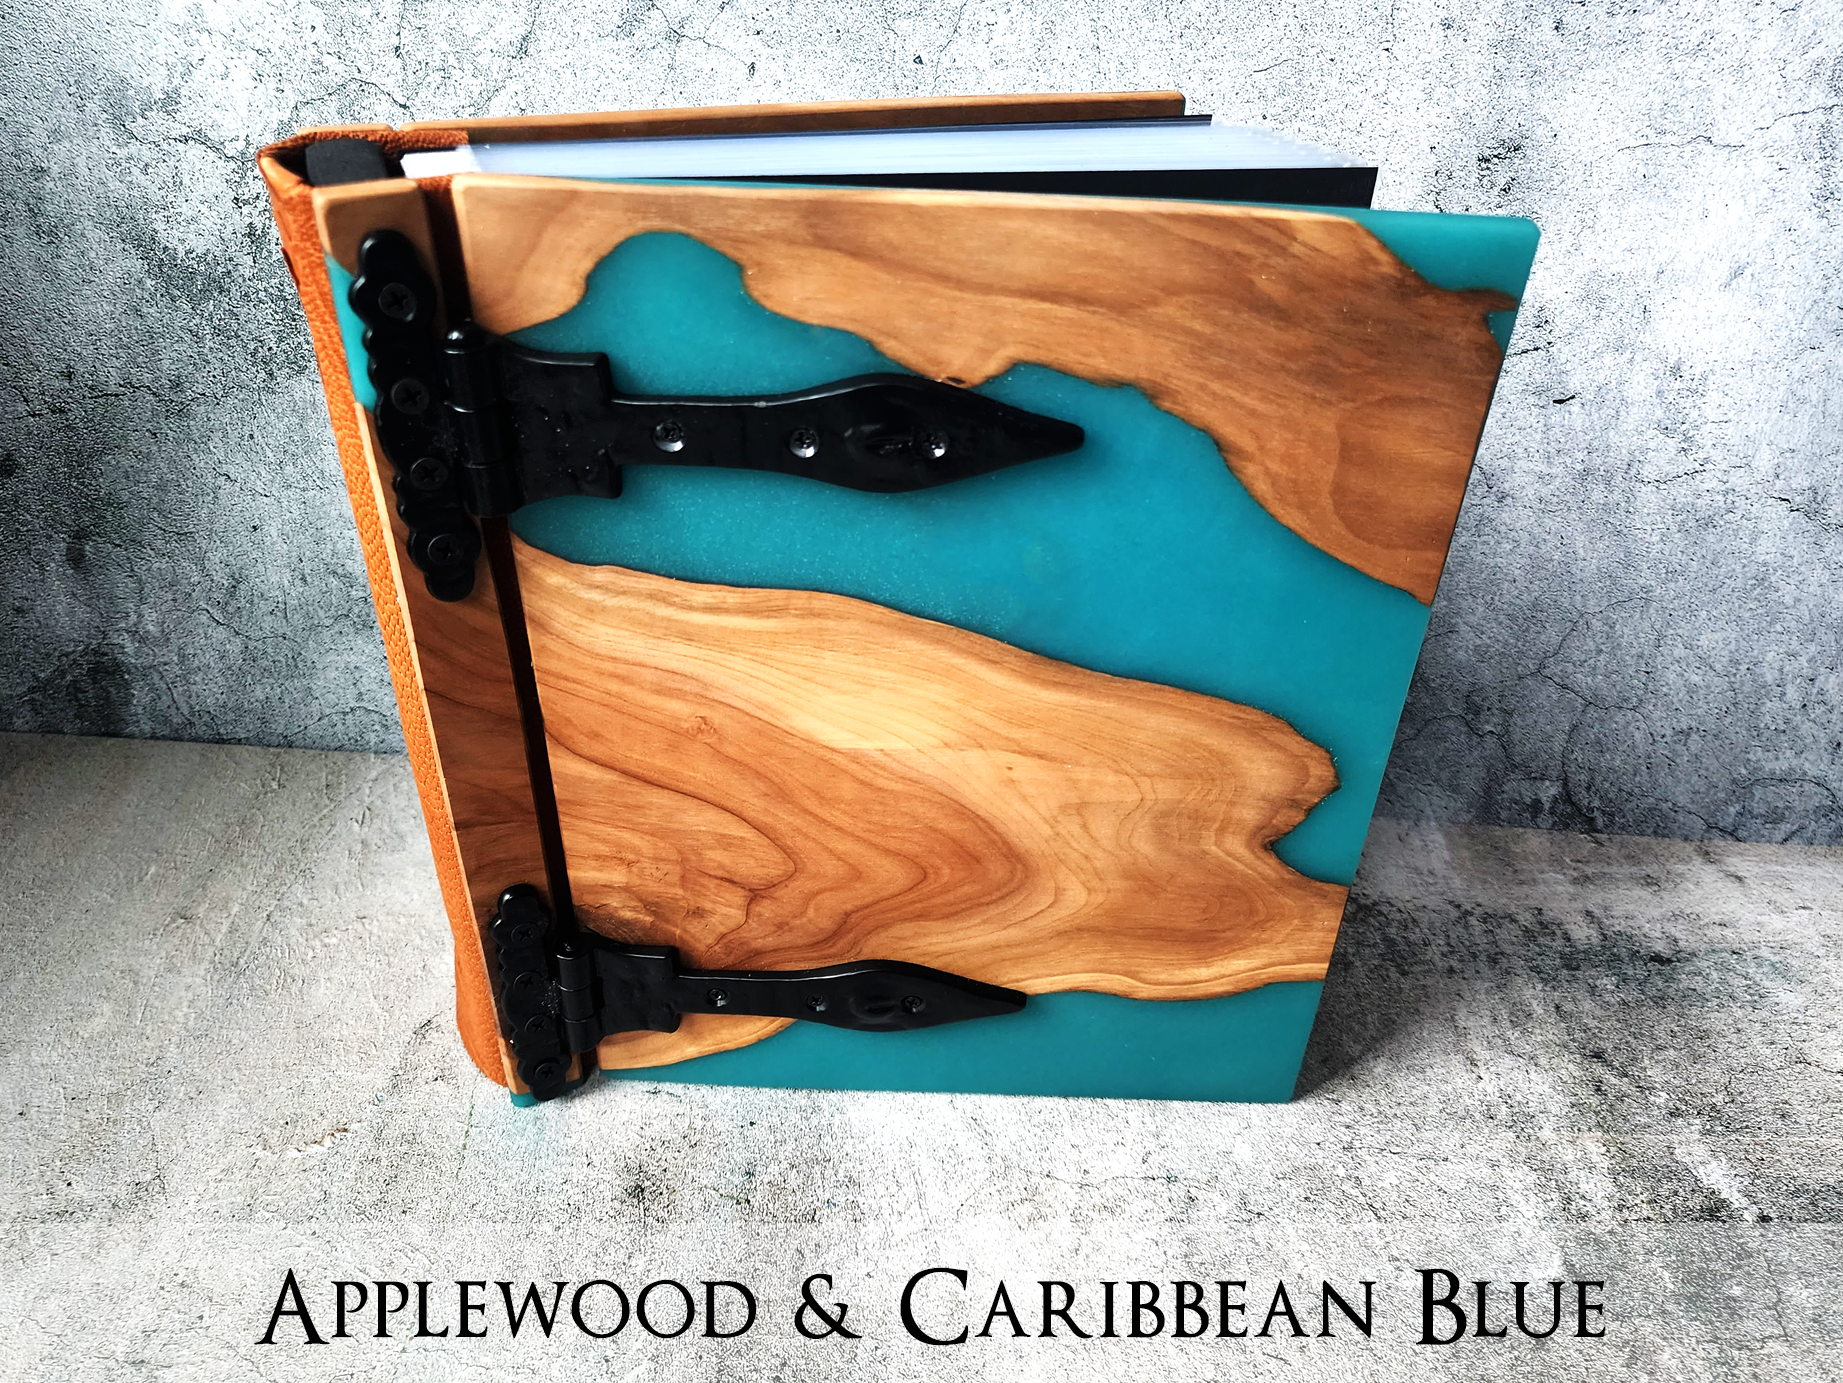  Capture travel memories in a custom journal with a distinctive river table wood and epoxy cover by Tylir Wisdom at Rustic Engravings.